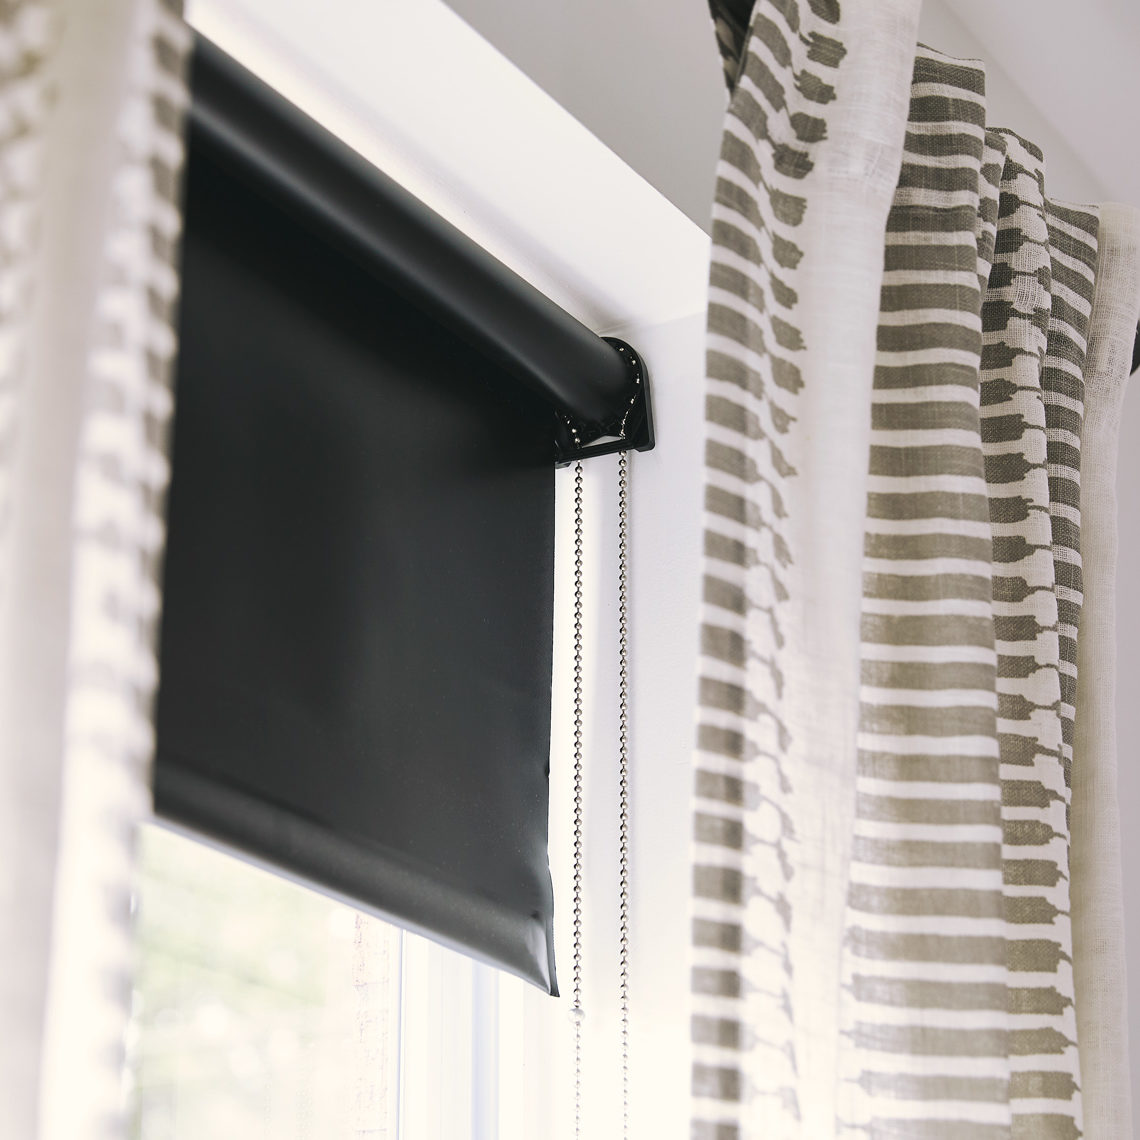 A blackout roller shade hangs between striped curtains